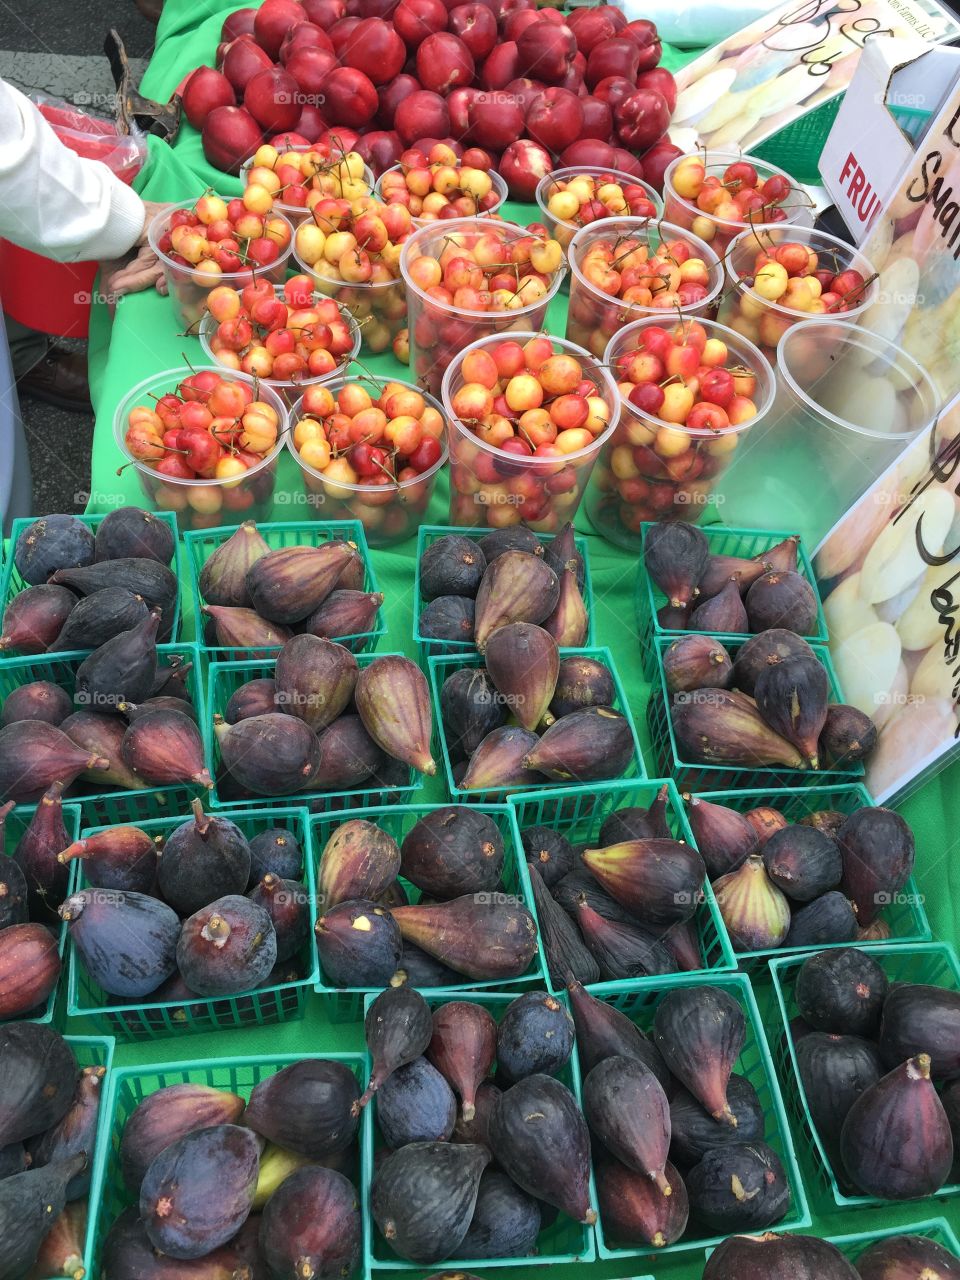 Fruits at the farmers market 